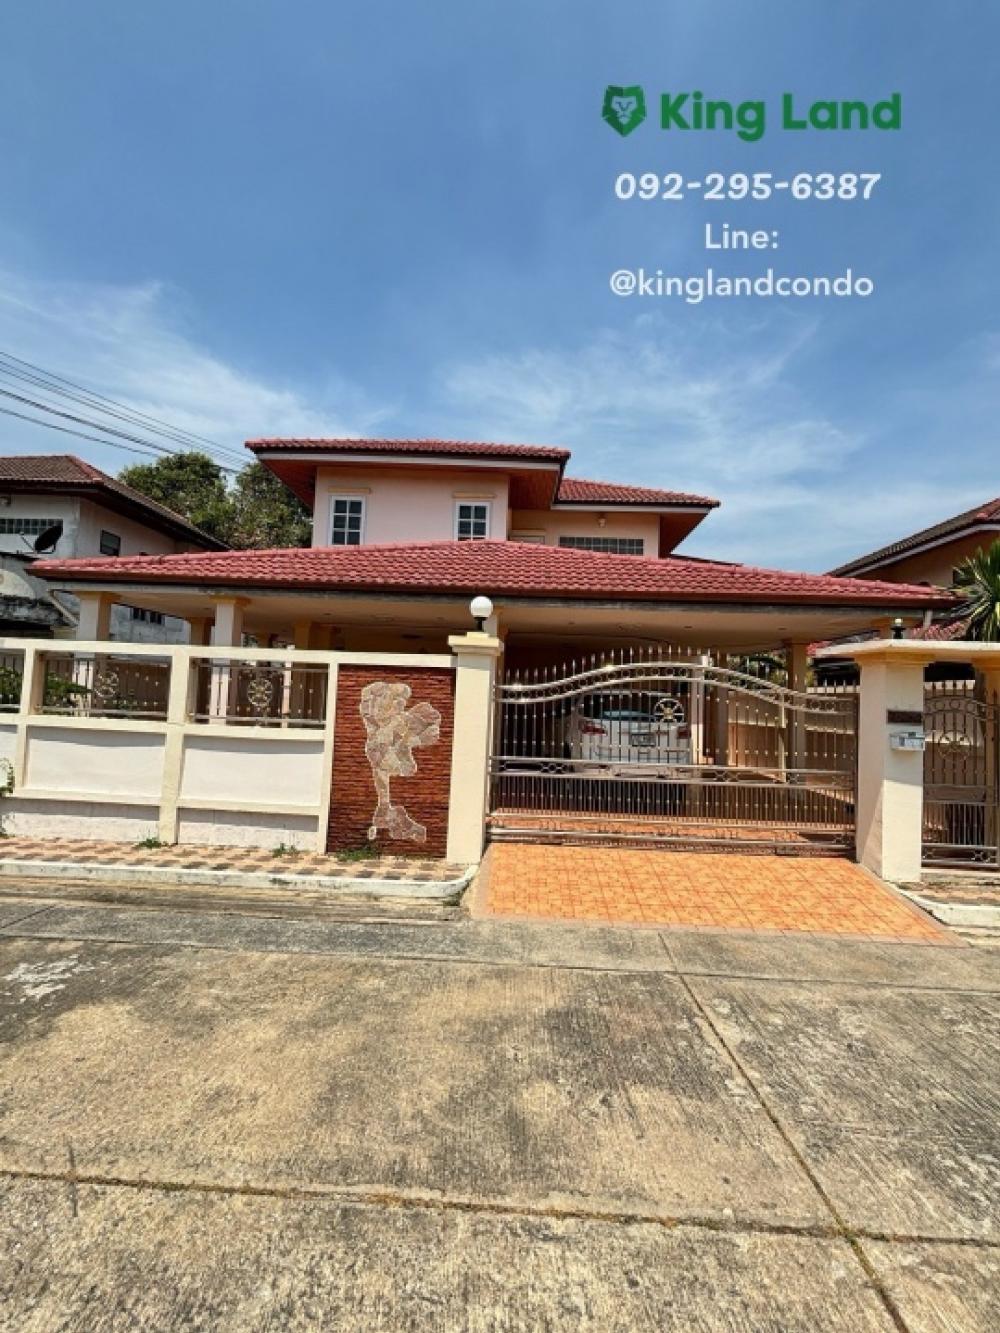 For RentHouseNawamin, Ramindra : 🏡 #2-storey detached house for rent with furniture, 4 bedrooms, 4 bathrooms #Sermsiri Village 7 Soi Phraya Suren 30 Ramintra Road 109, price 30,000 ฿/month #Single house for rent, pets allowed 🐶🐱